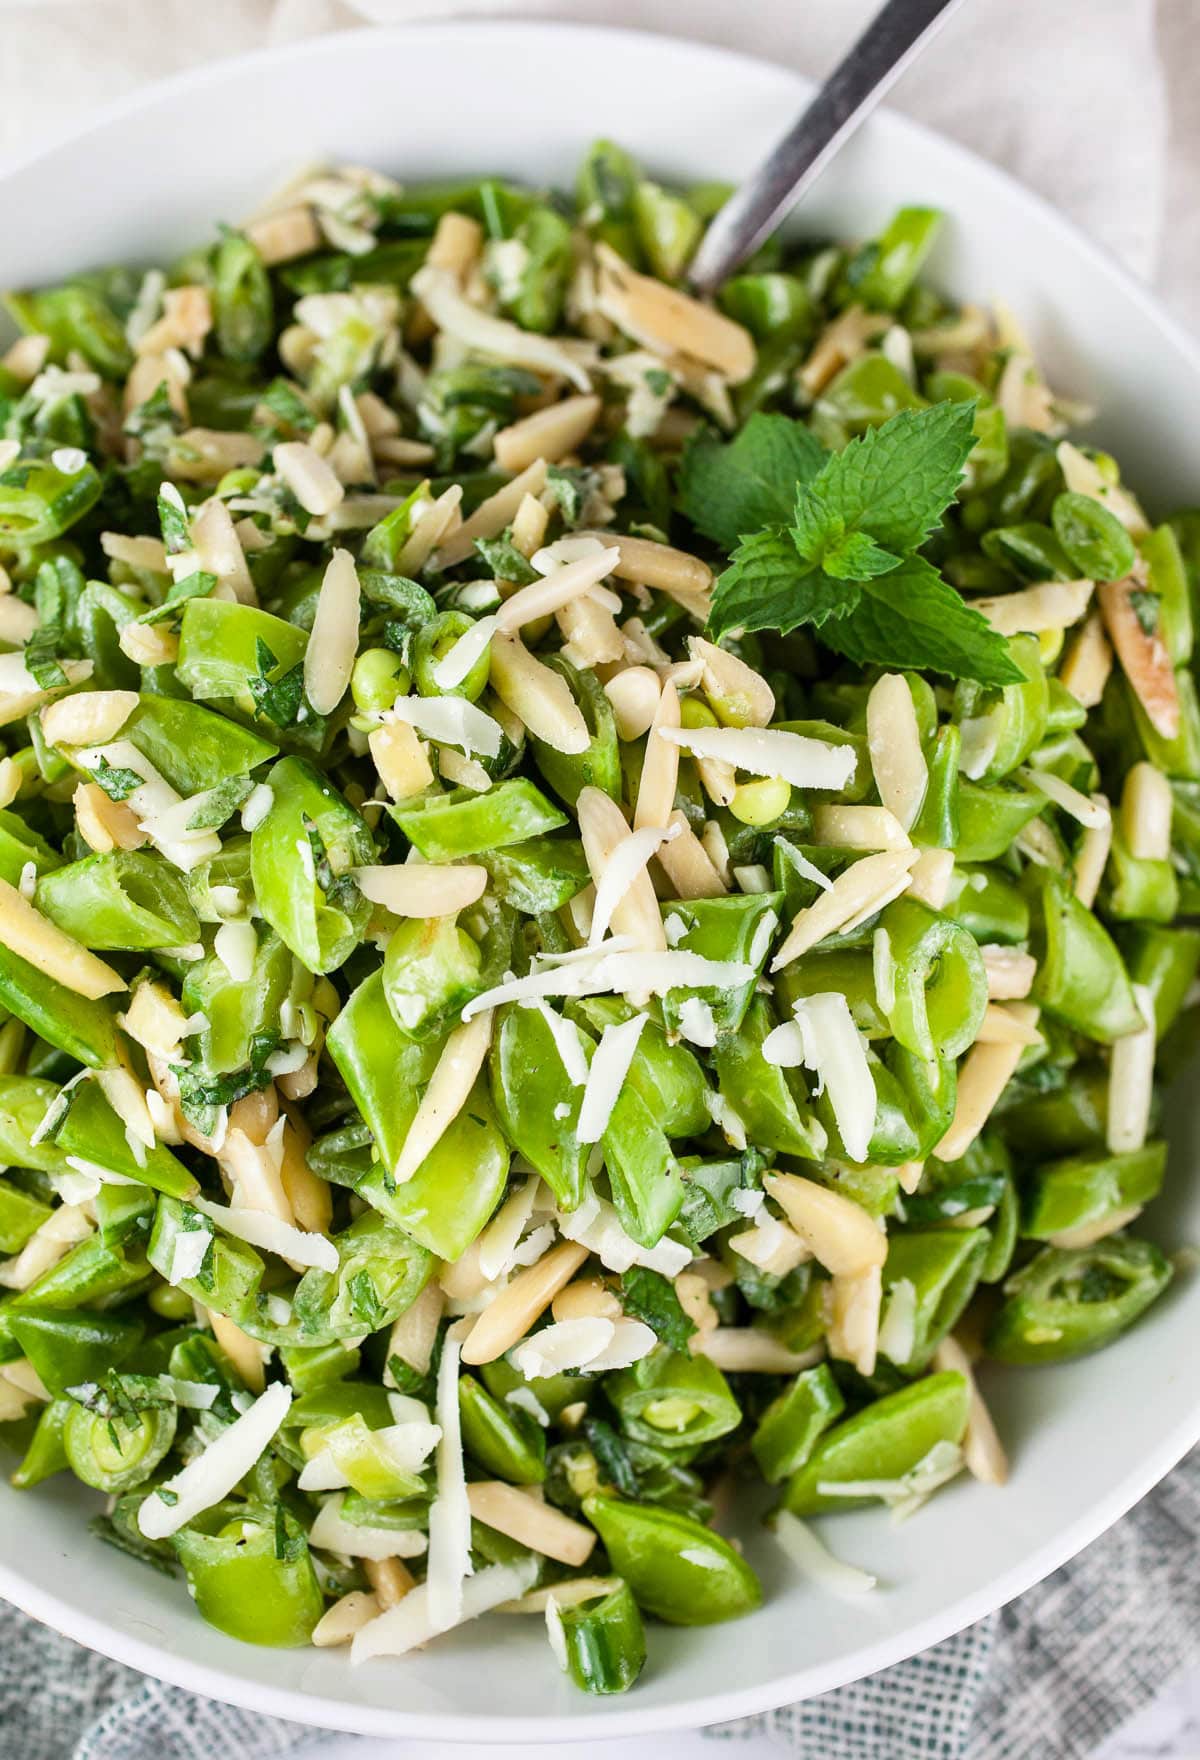 Pea salad with mint, almonds, and Parmesan cheese in white bowl.